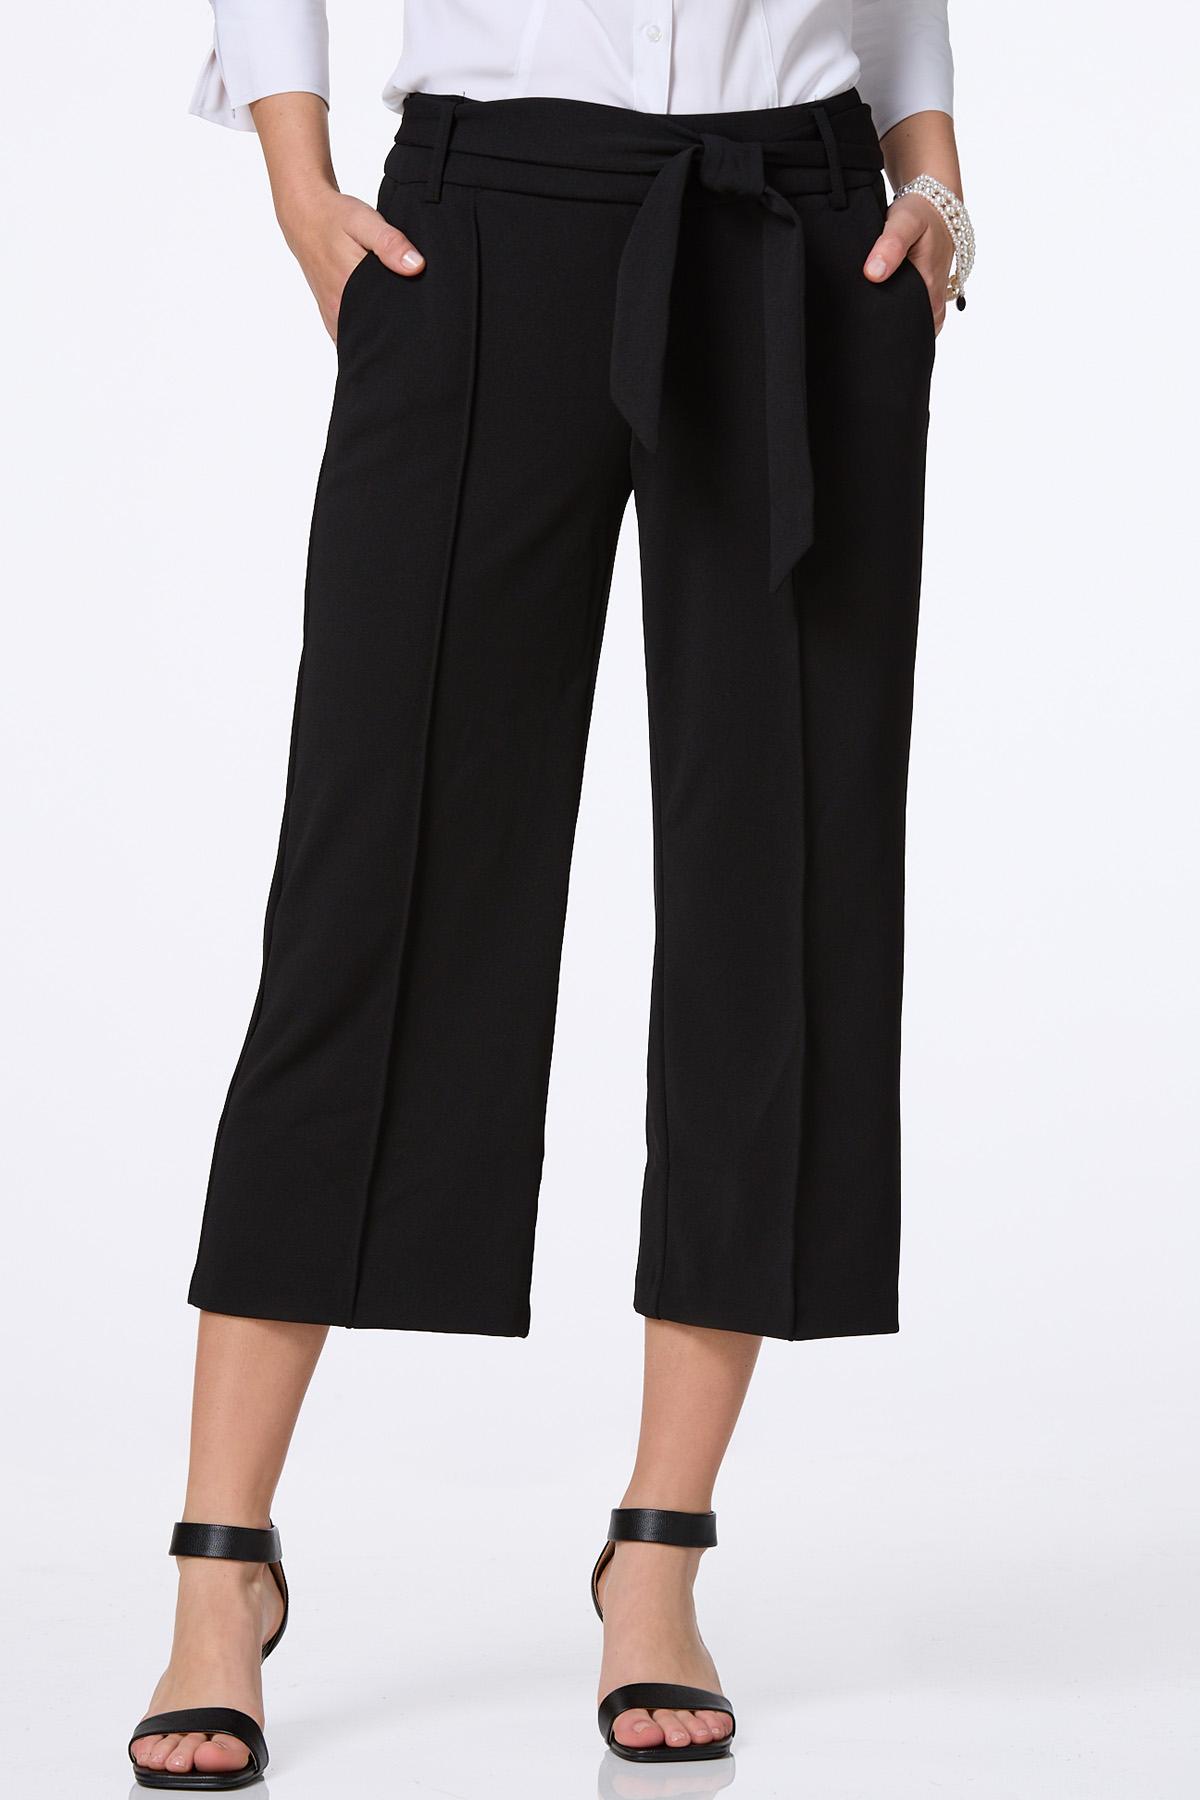 Cato Fashions  Cato Cropped Wide Leg Trouser Pants